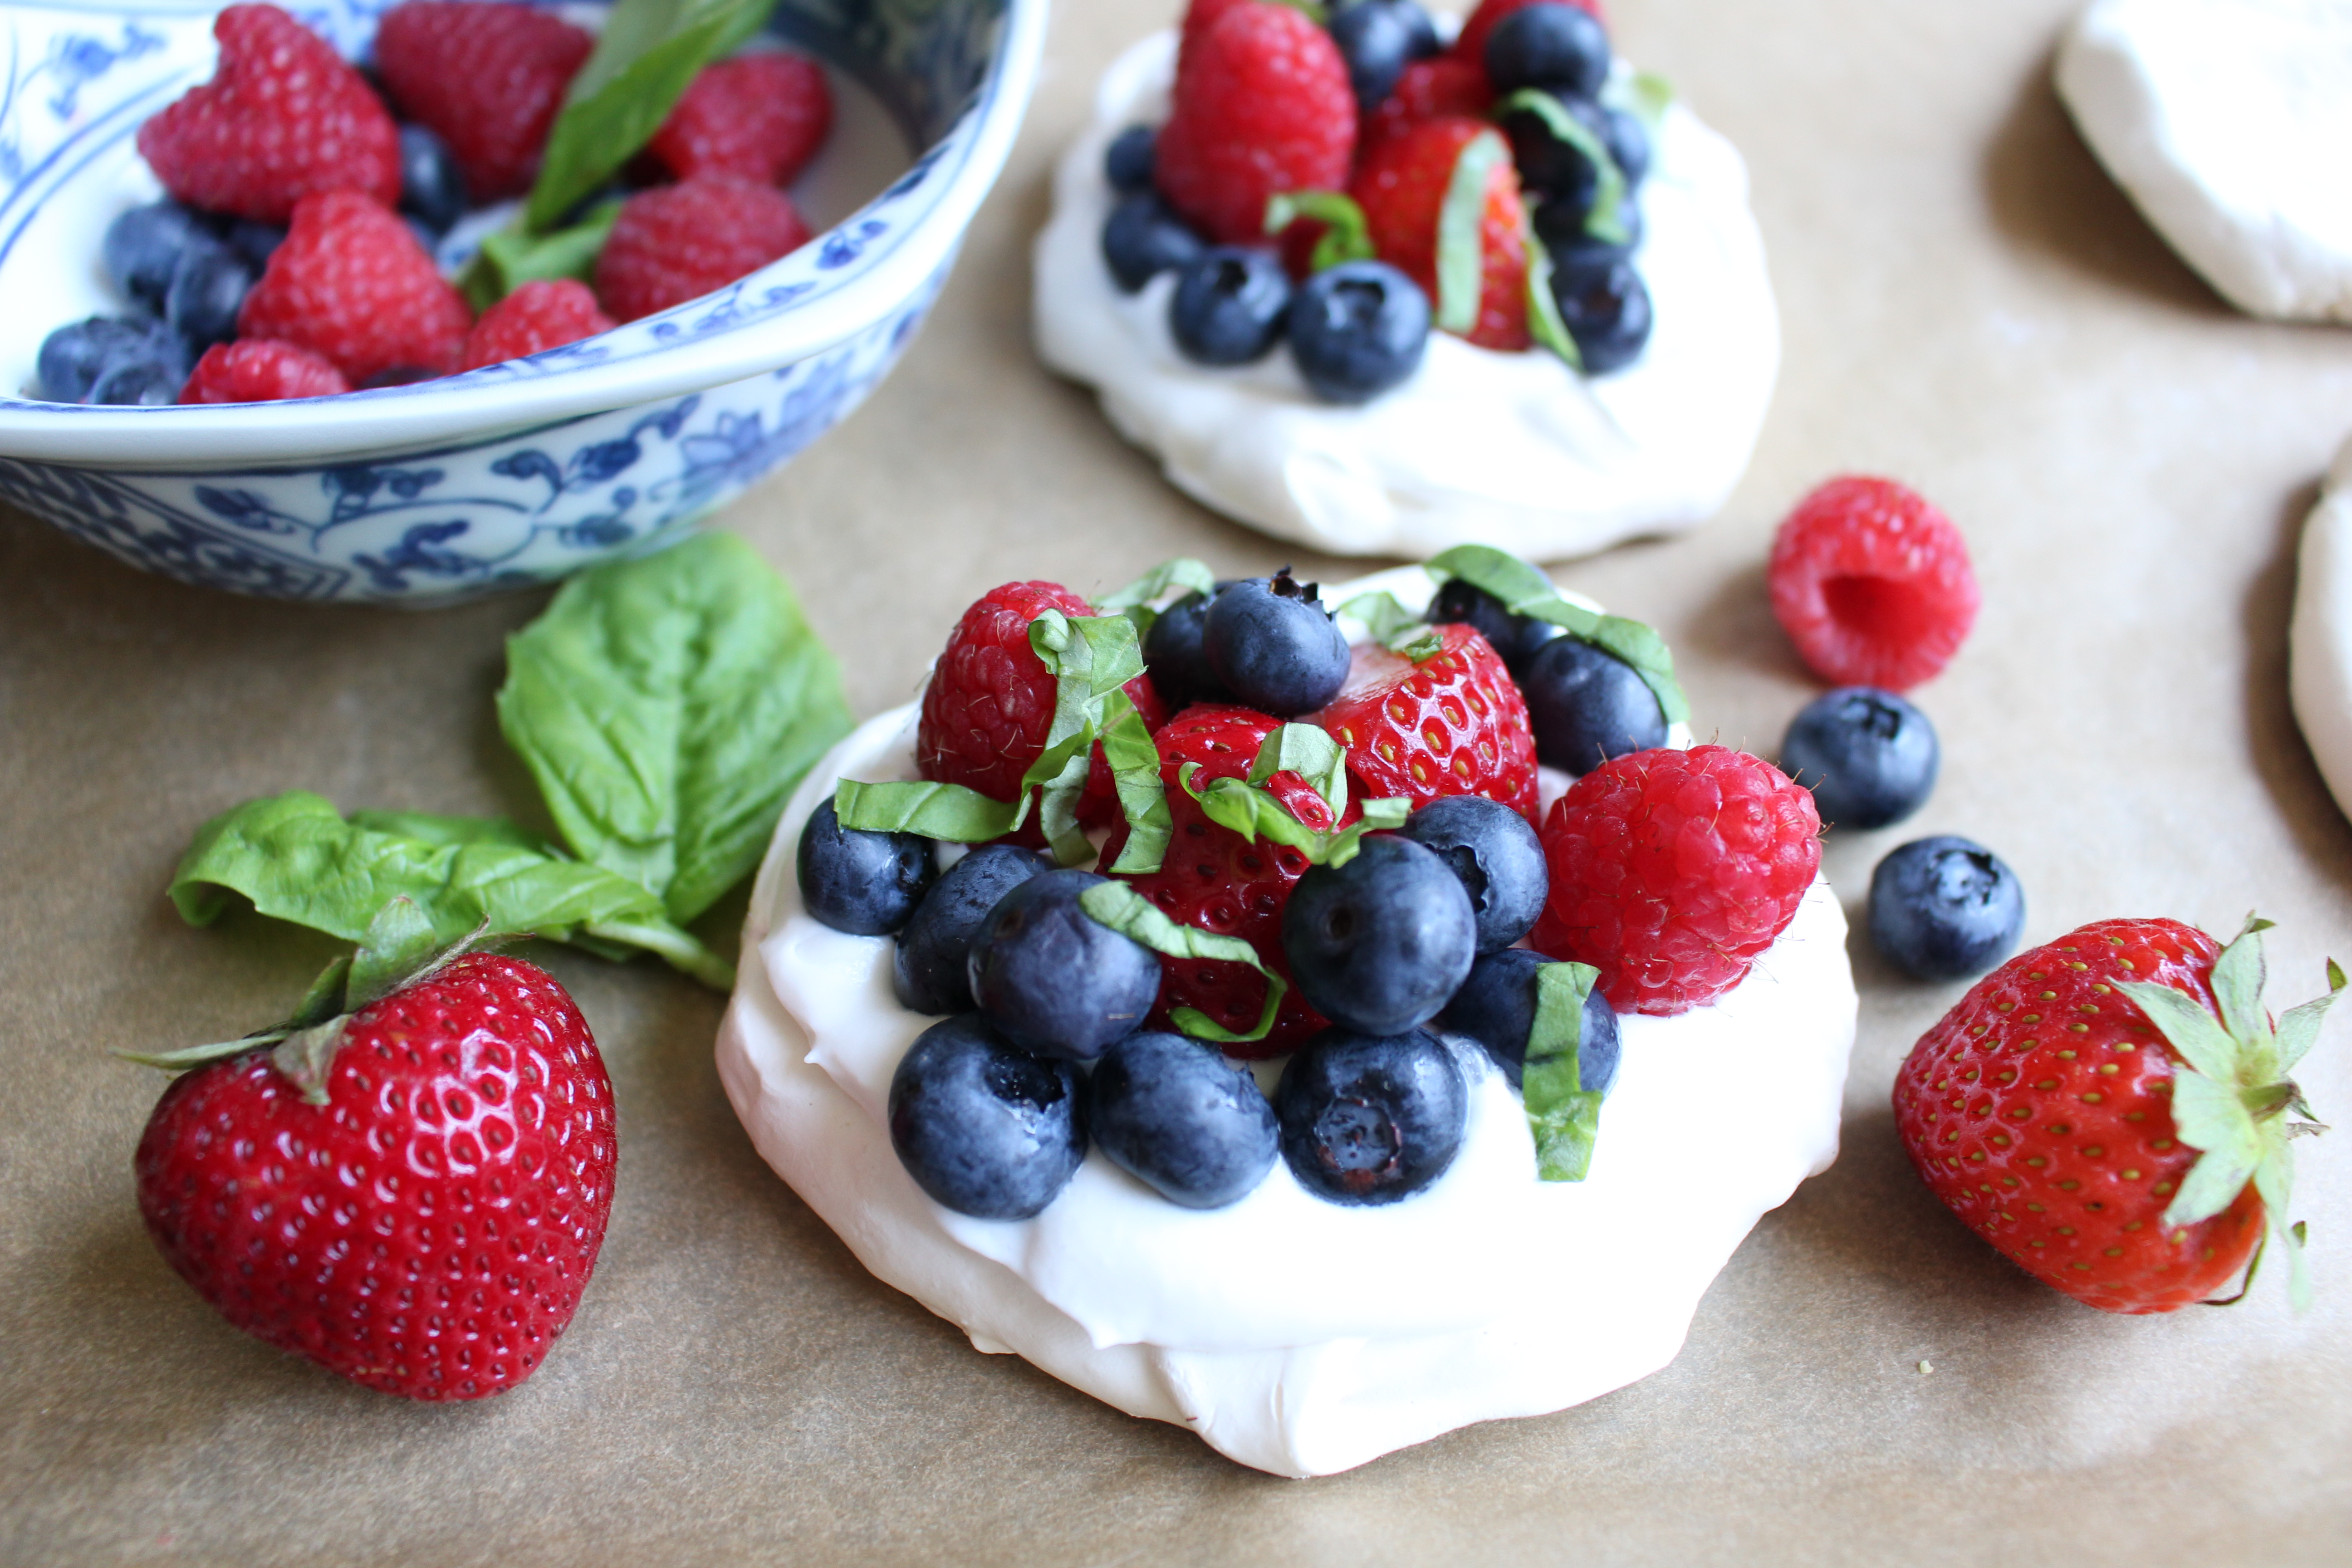 These meringues, topped with coconut whipped cream, fresh berries, and chopped basil, are the perfect summer dessert - light, airy, and fresh!